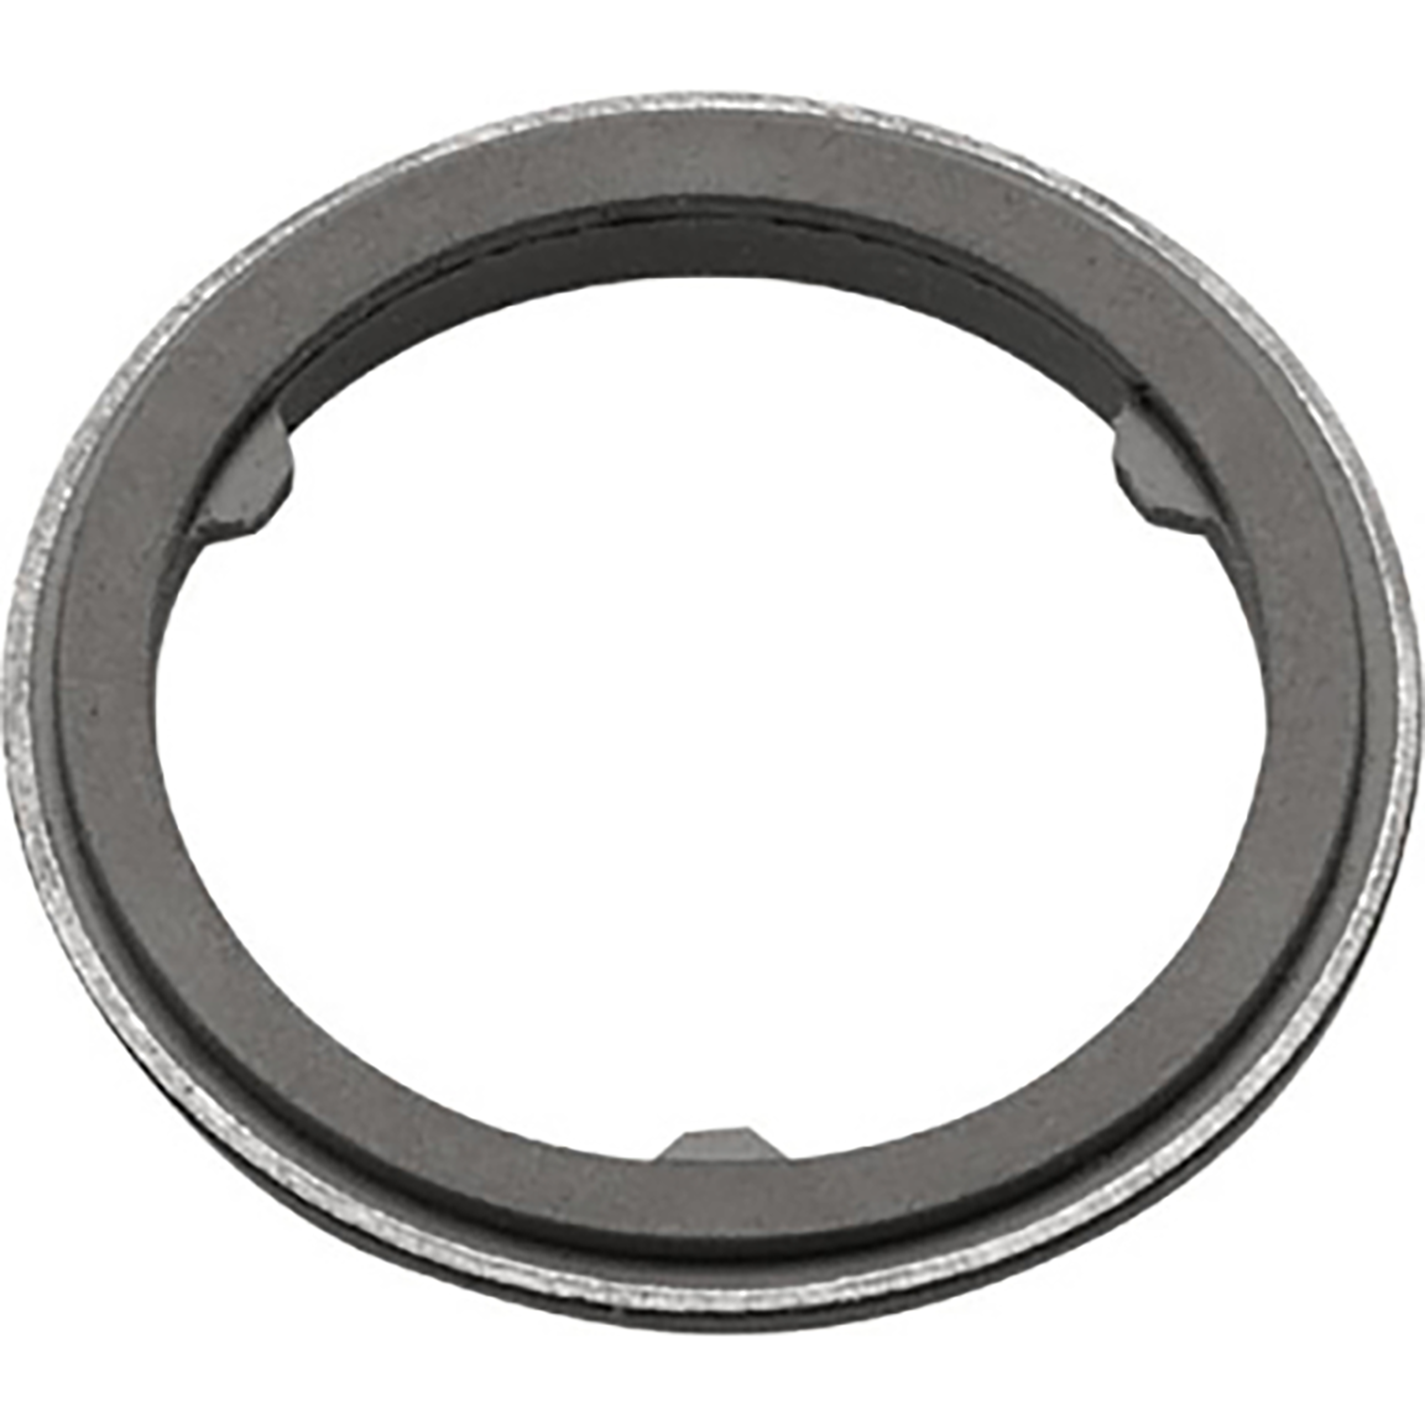 OL-3/8-200 SEALING RING sold in multiples of 200 only